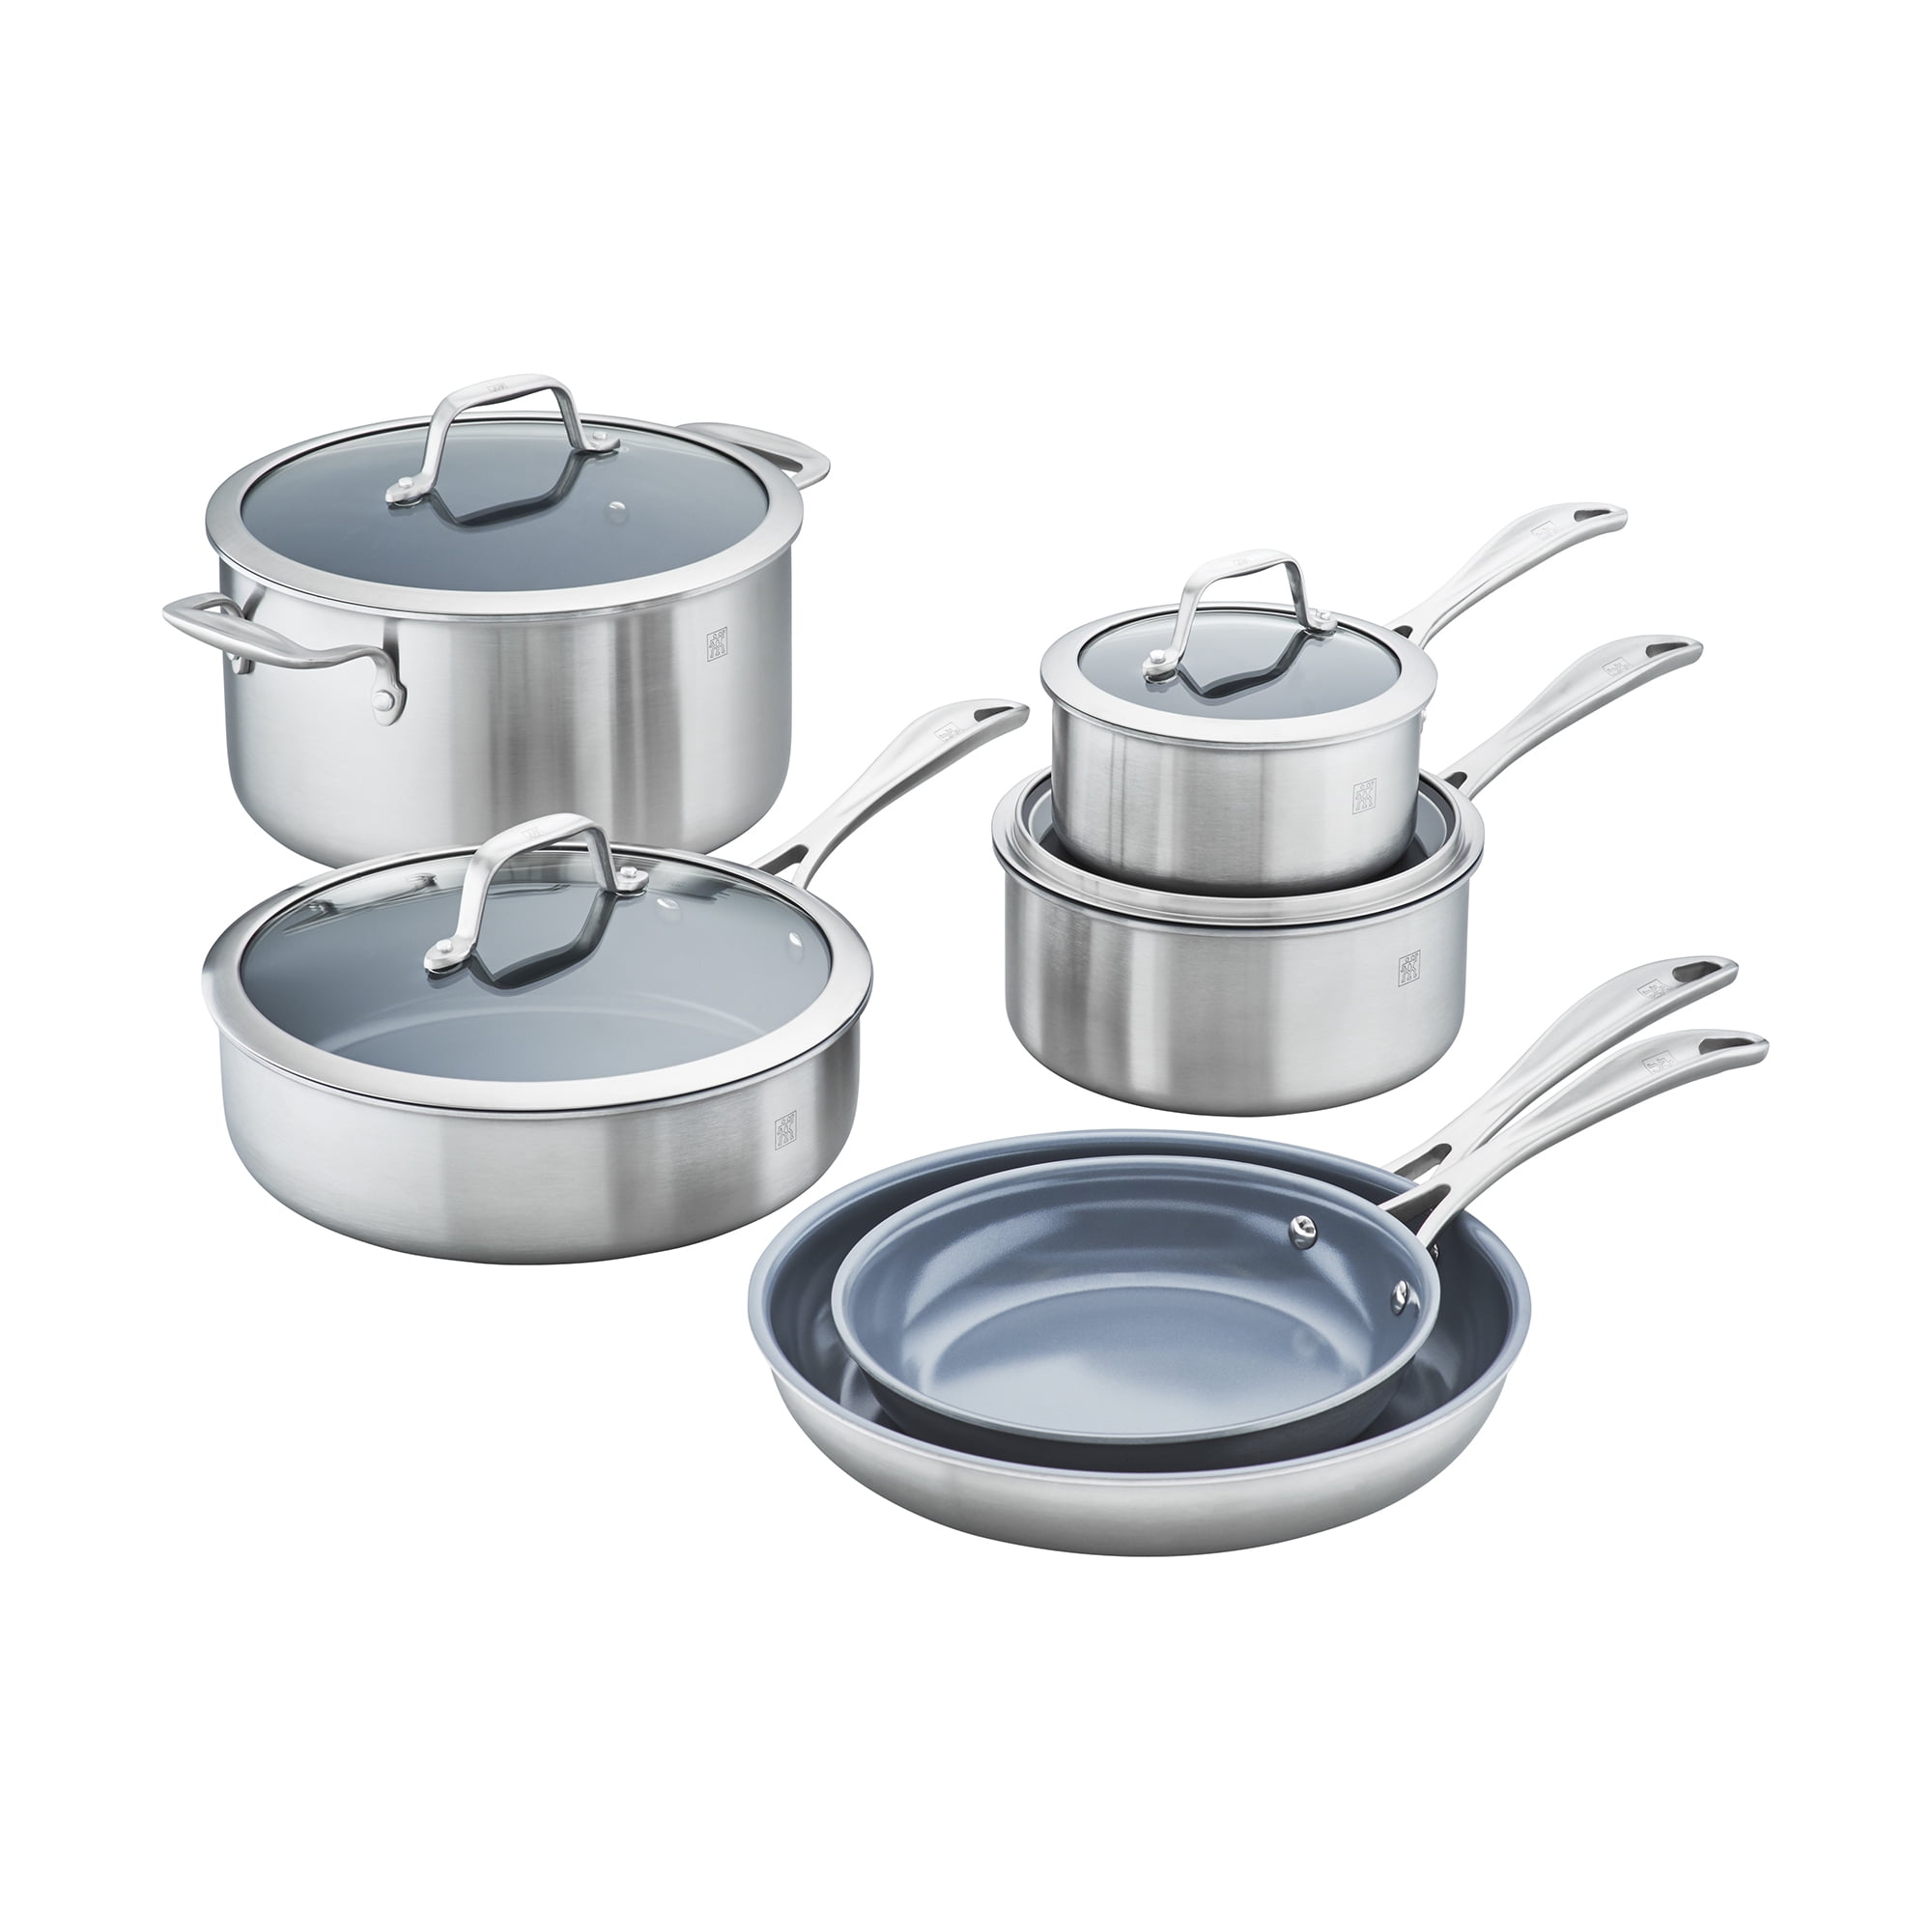 ZWILLING Spirit Stainless Stainless Steel Cookware Set, 12 pc